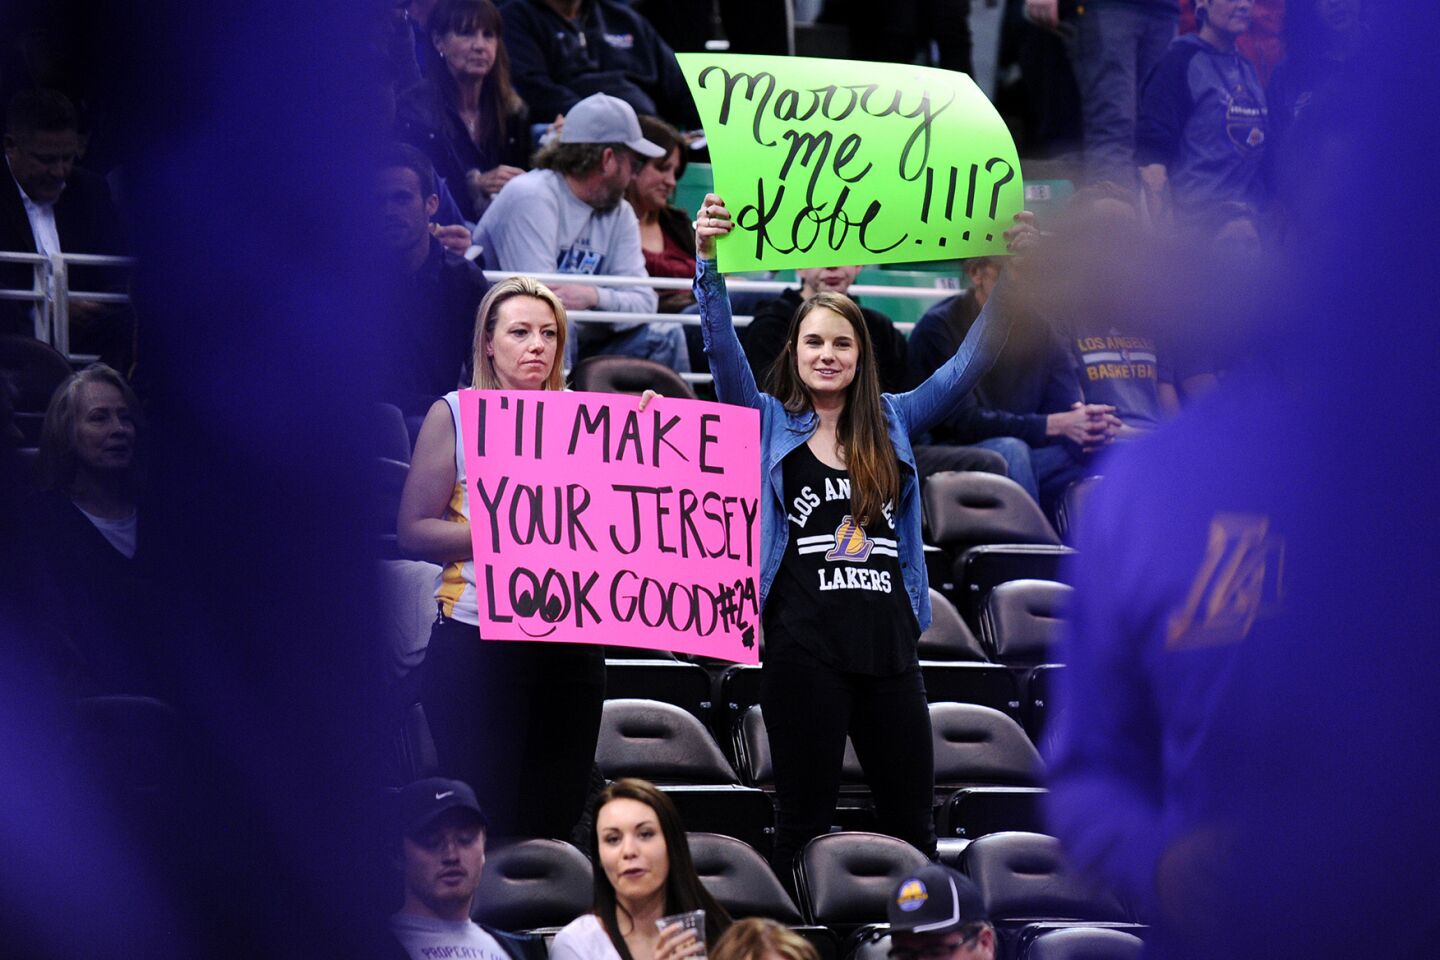 Fans hold signs as Kobe Bryant warms-up before a game with the Jazz in Salt Lake City on March 28.